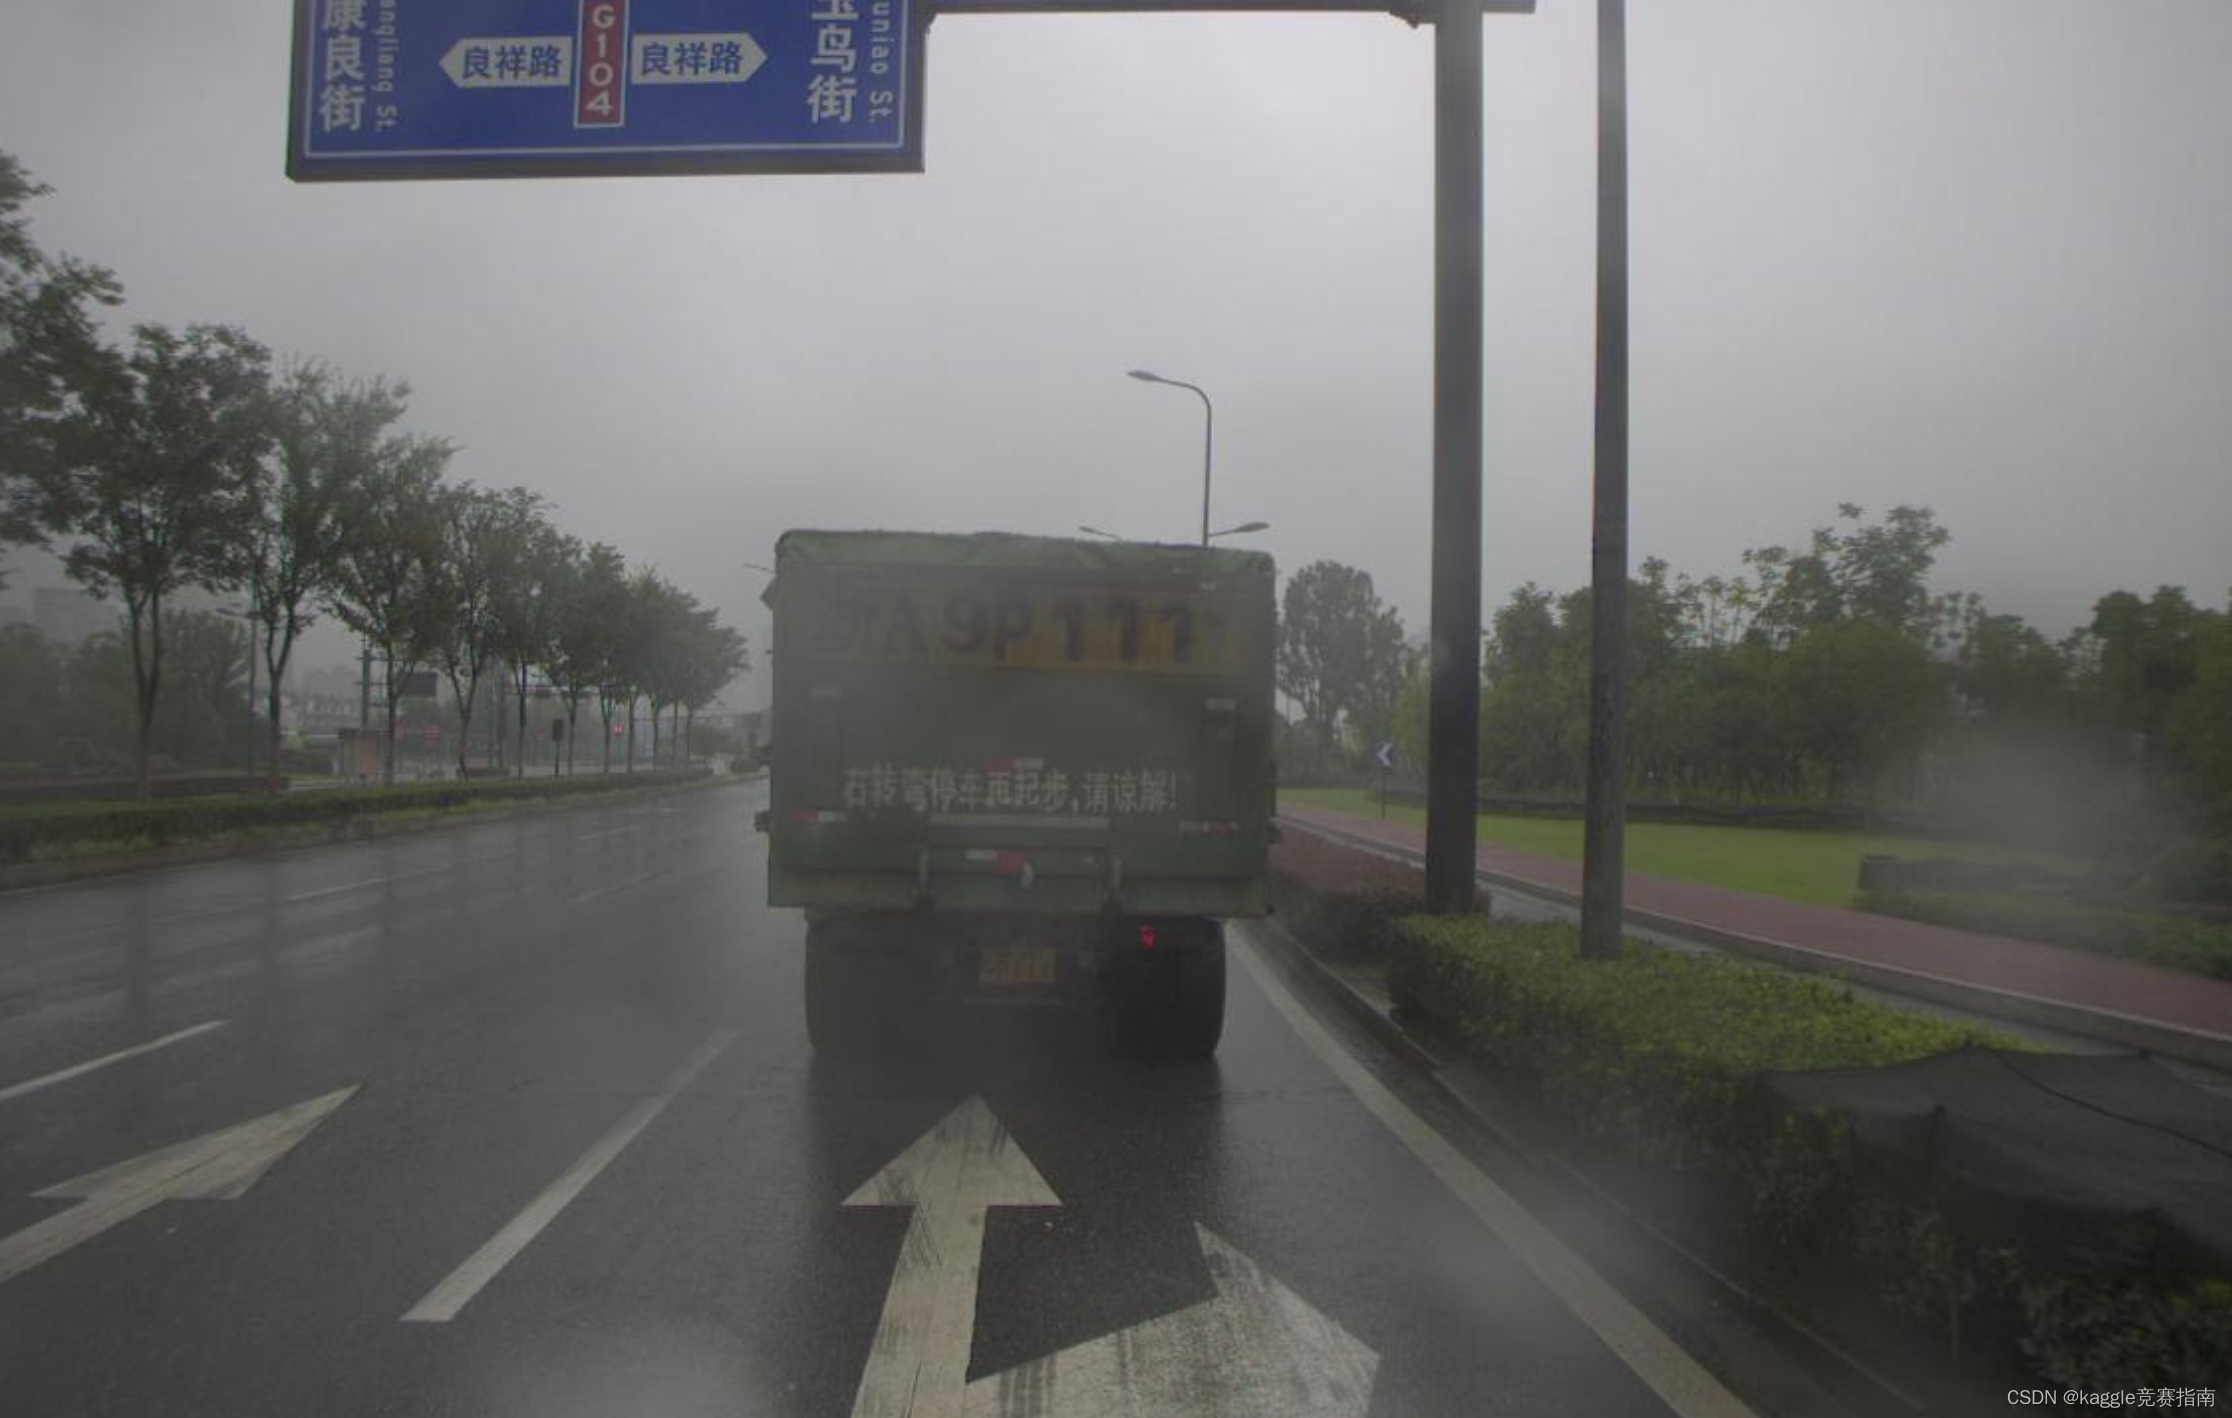 a truck travels on a road in wuhan, hubei province